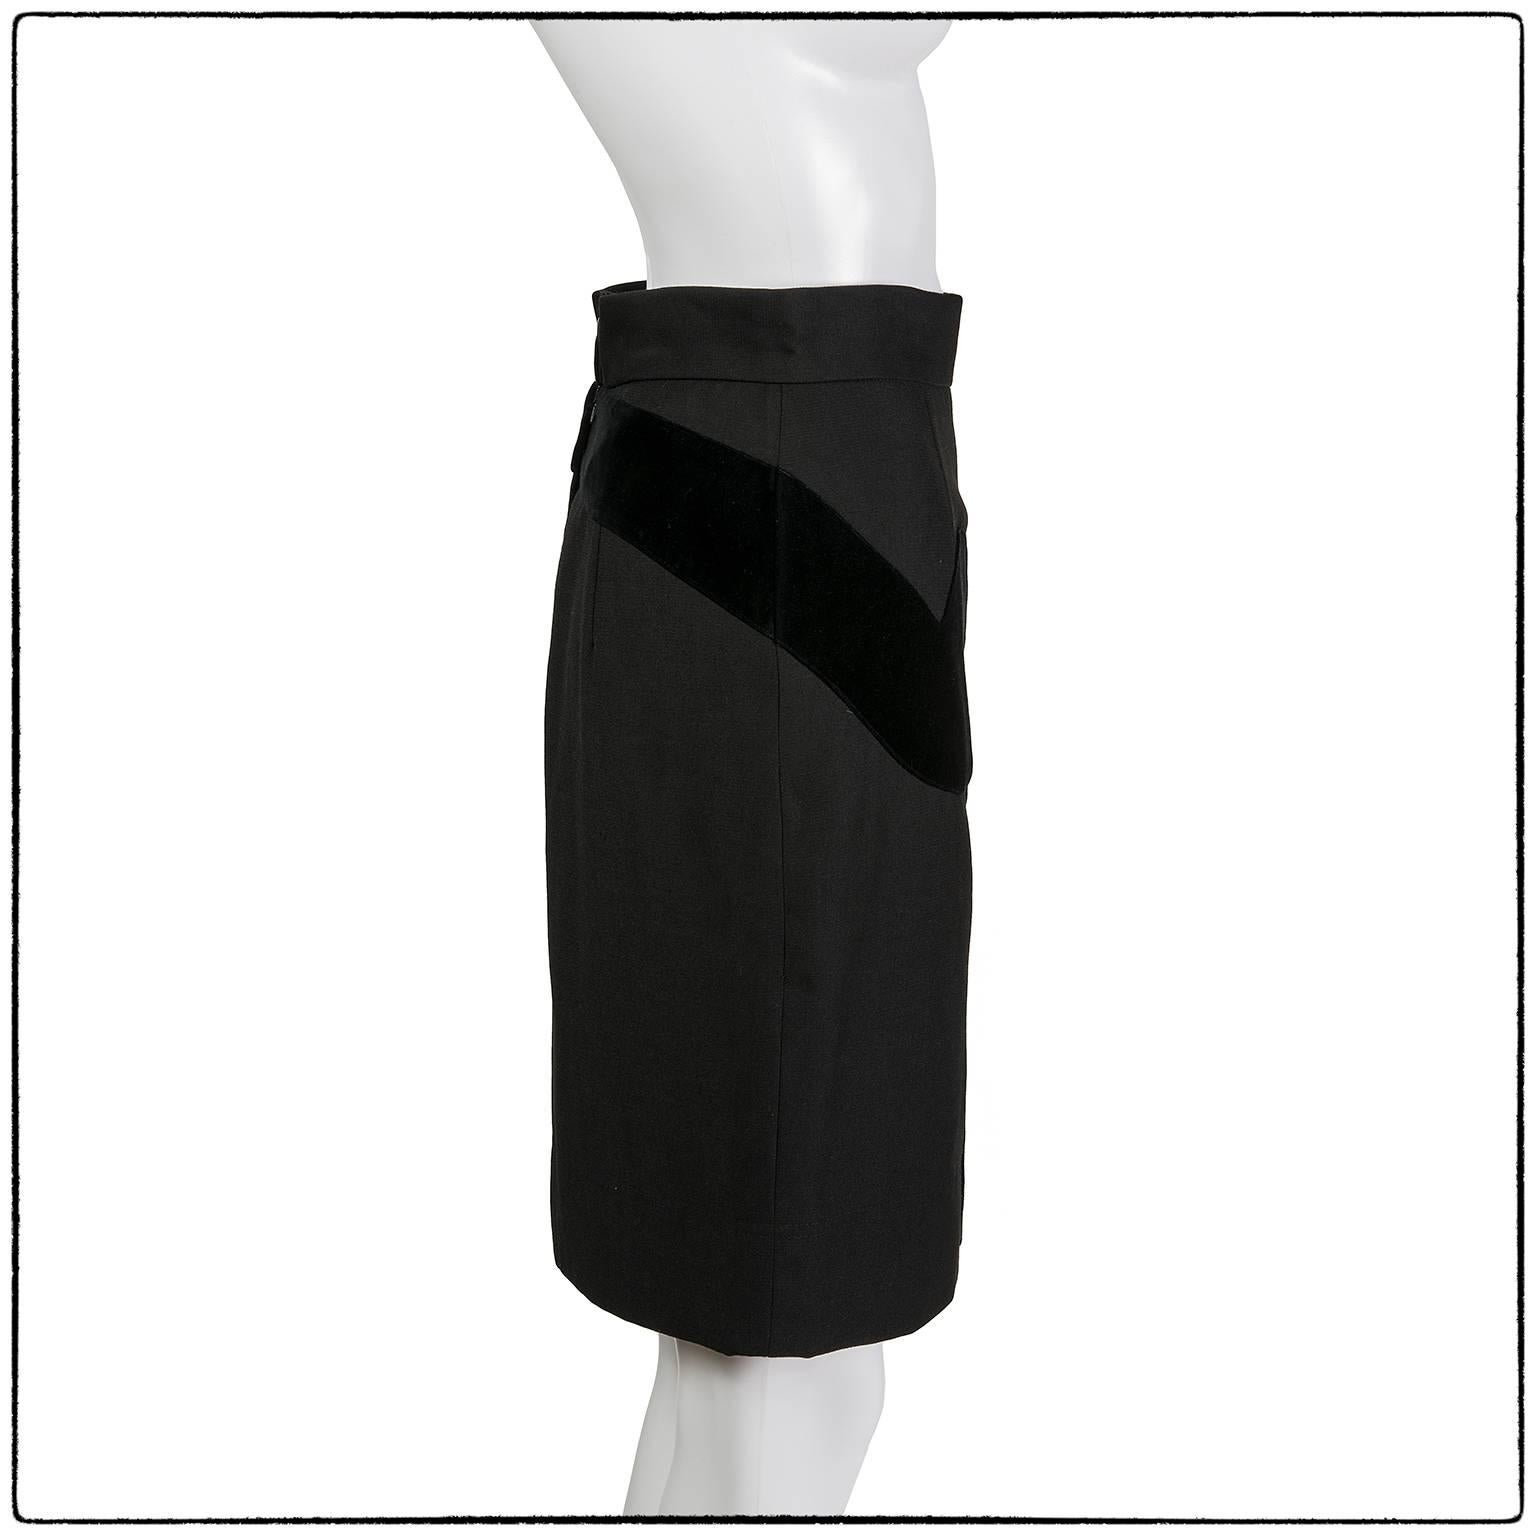 Black Moschino Cheap and Chic question mark black skirt, 1990s